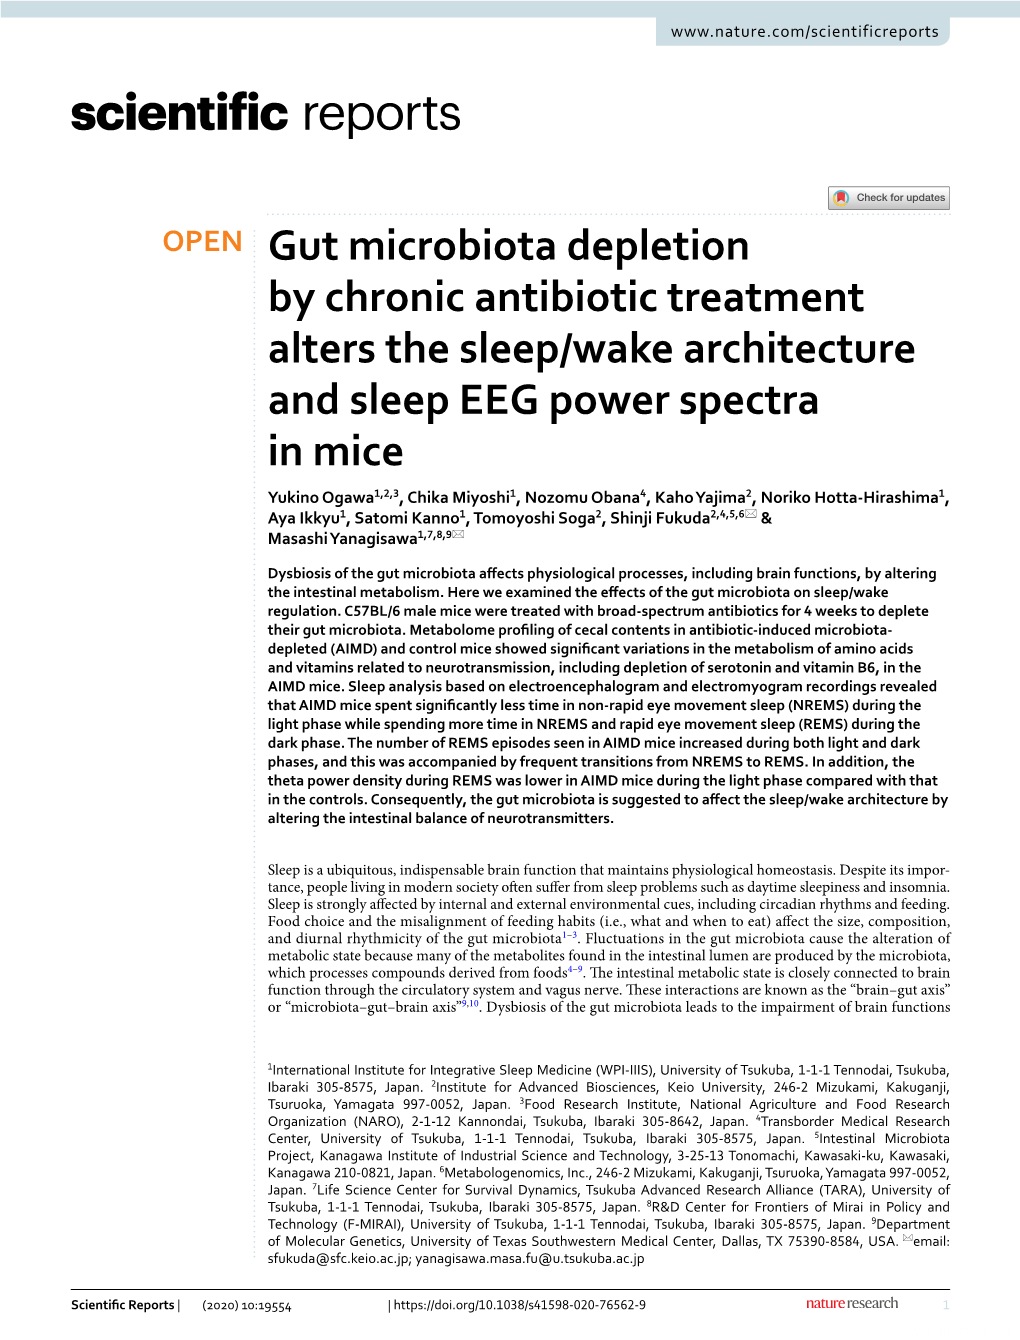 Gut Microbiota Depletion by Chronic Antibiotic Treatment Alters the Sleep/Wake Architecture and Sleep EEG Power Spectra in Mice